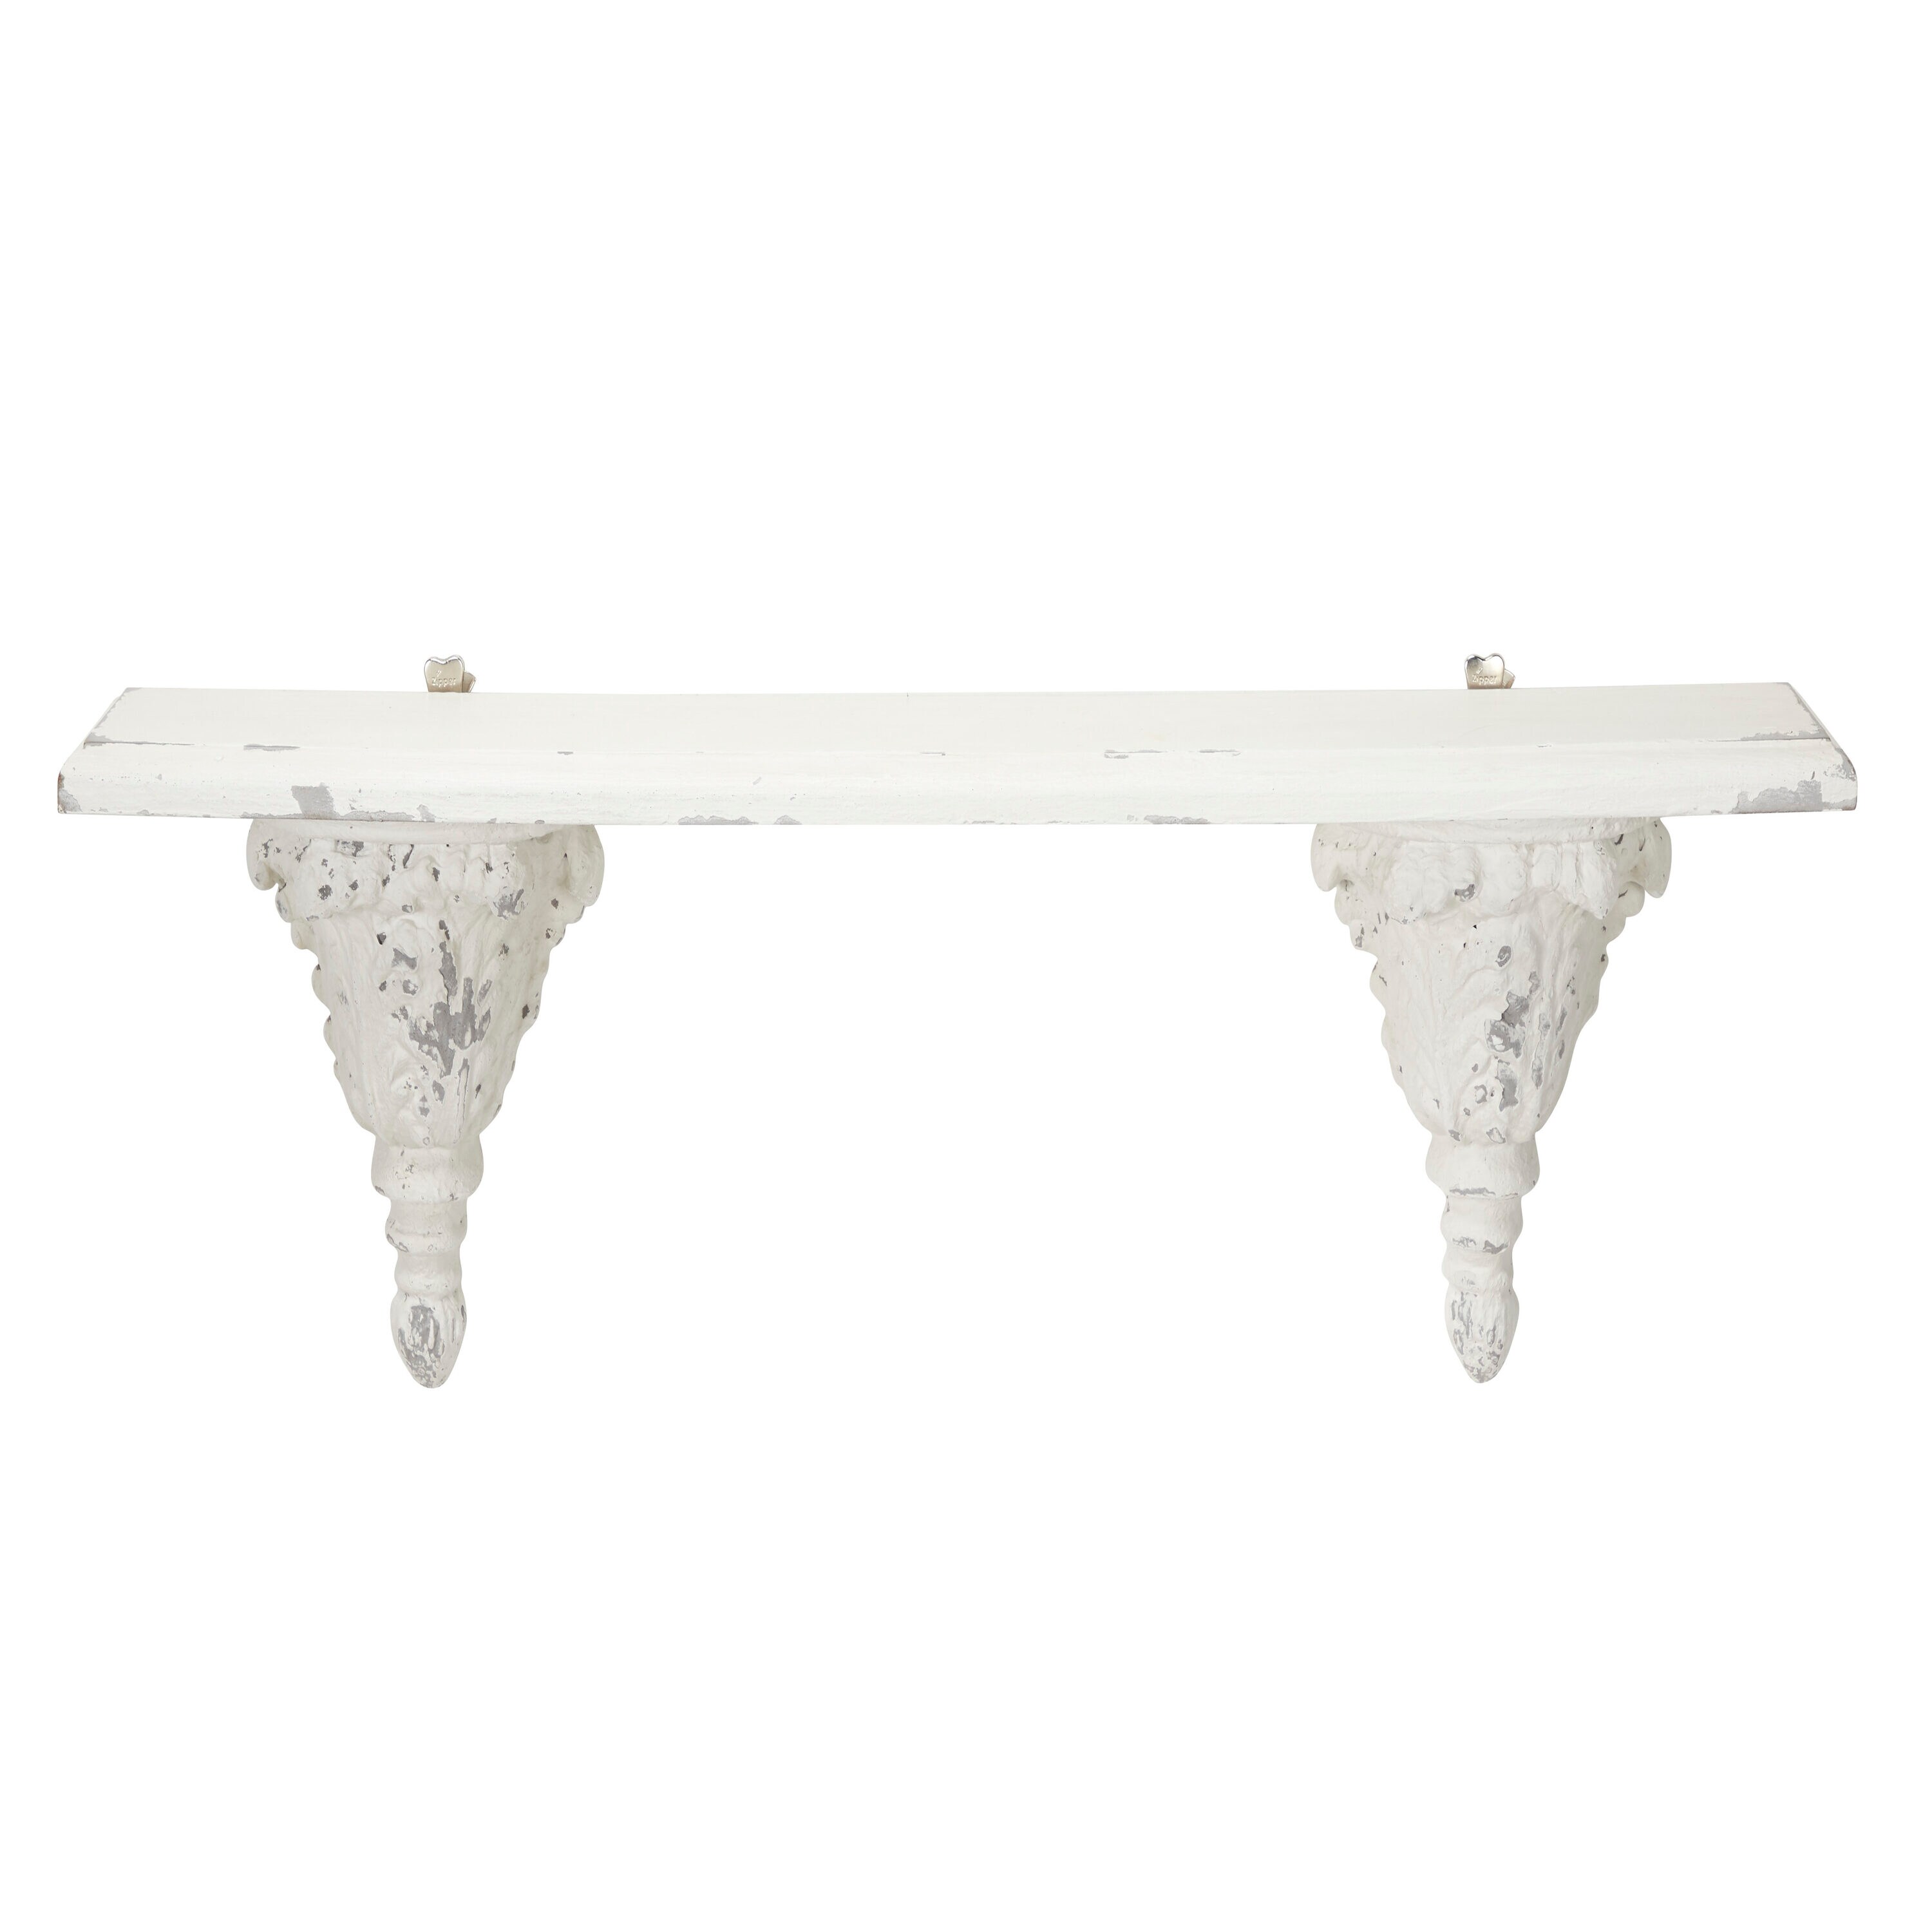 39 x 11 Large White Floating Wall Shelf with Decorative Carvings